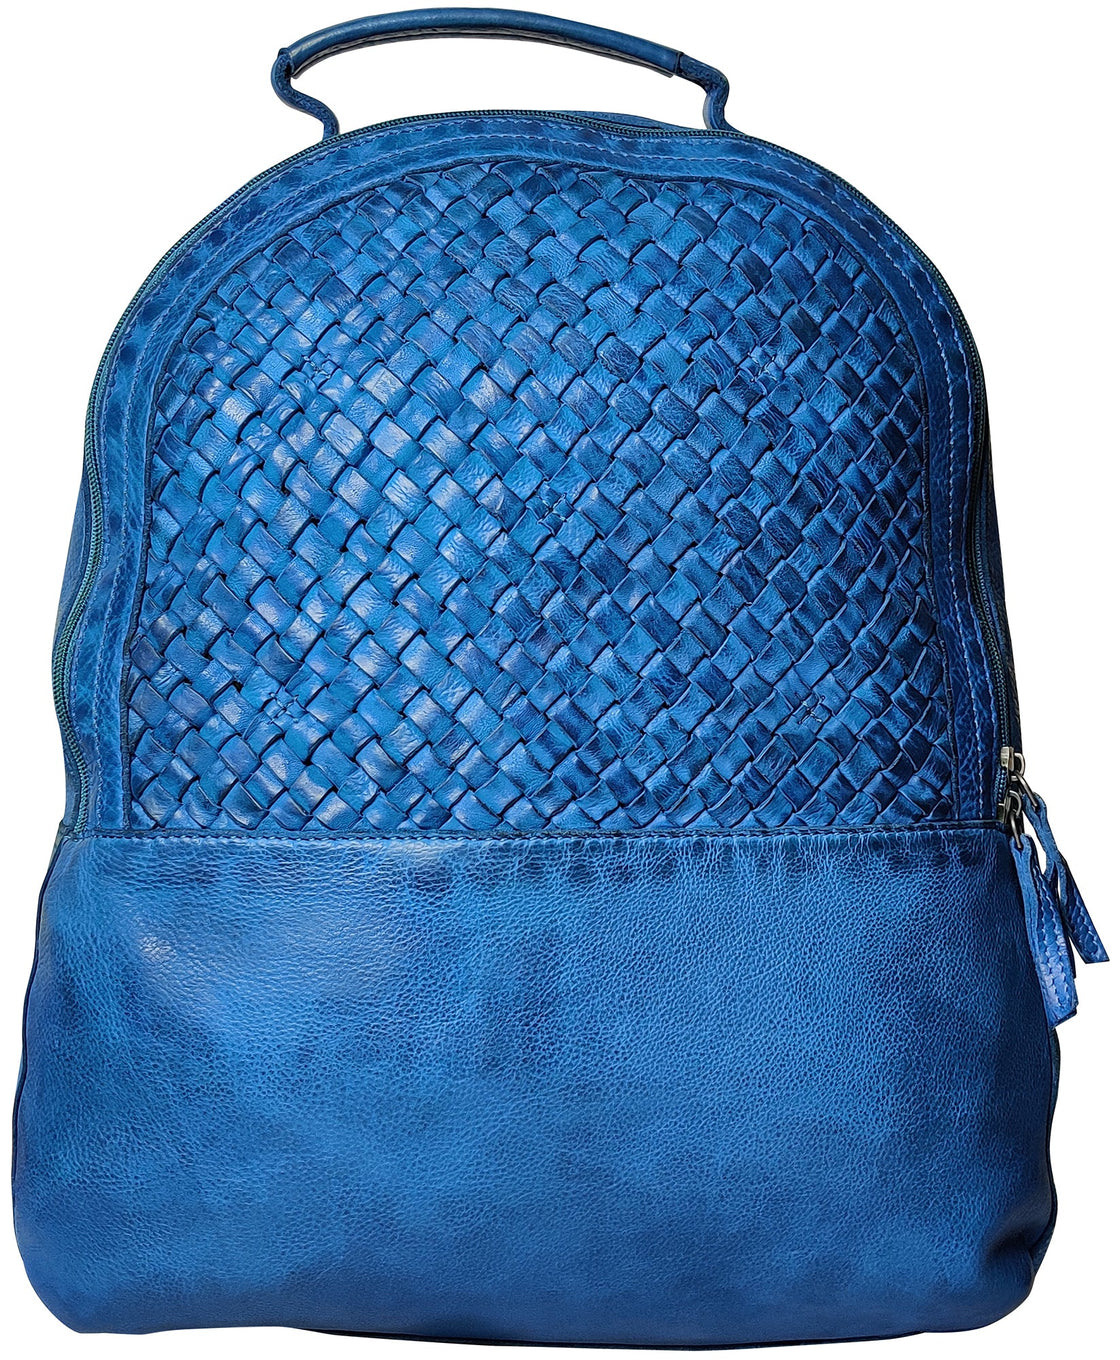 Leather Laptop Backpack for Women, Petrol Blue